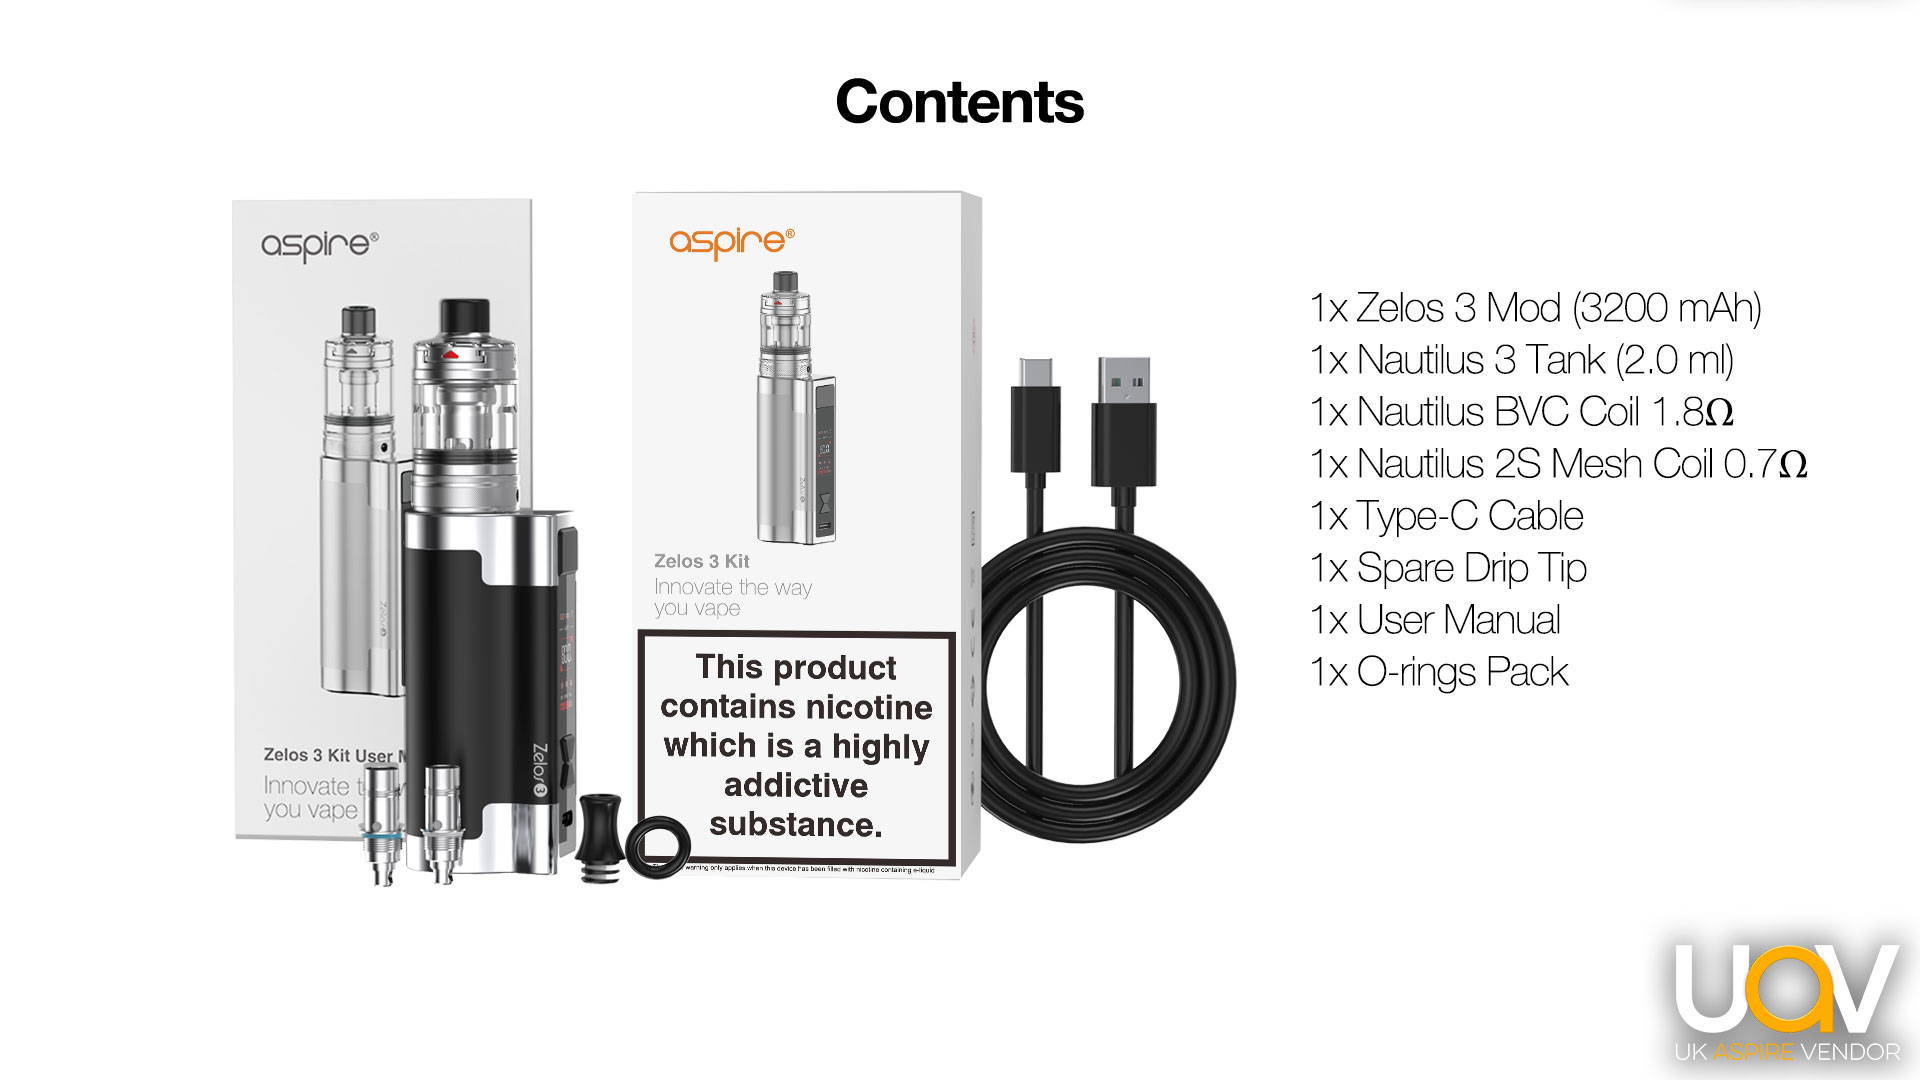 TPD Version  1* Zelos 3 Mod (3200 mAh) 1* Nautilus 3 Tank (2.0 ml) 1* Nautilus BVC Coil 1.8Ω 1* Nautilus 2S Mesh Coil 0.7Ω 1* Type-C Cable 1* Spare Drip Tip 1* User Manual 1* O-rings Pack